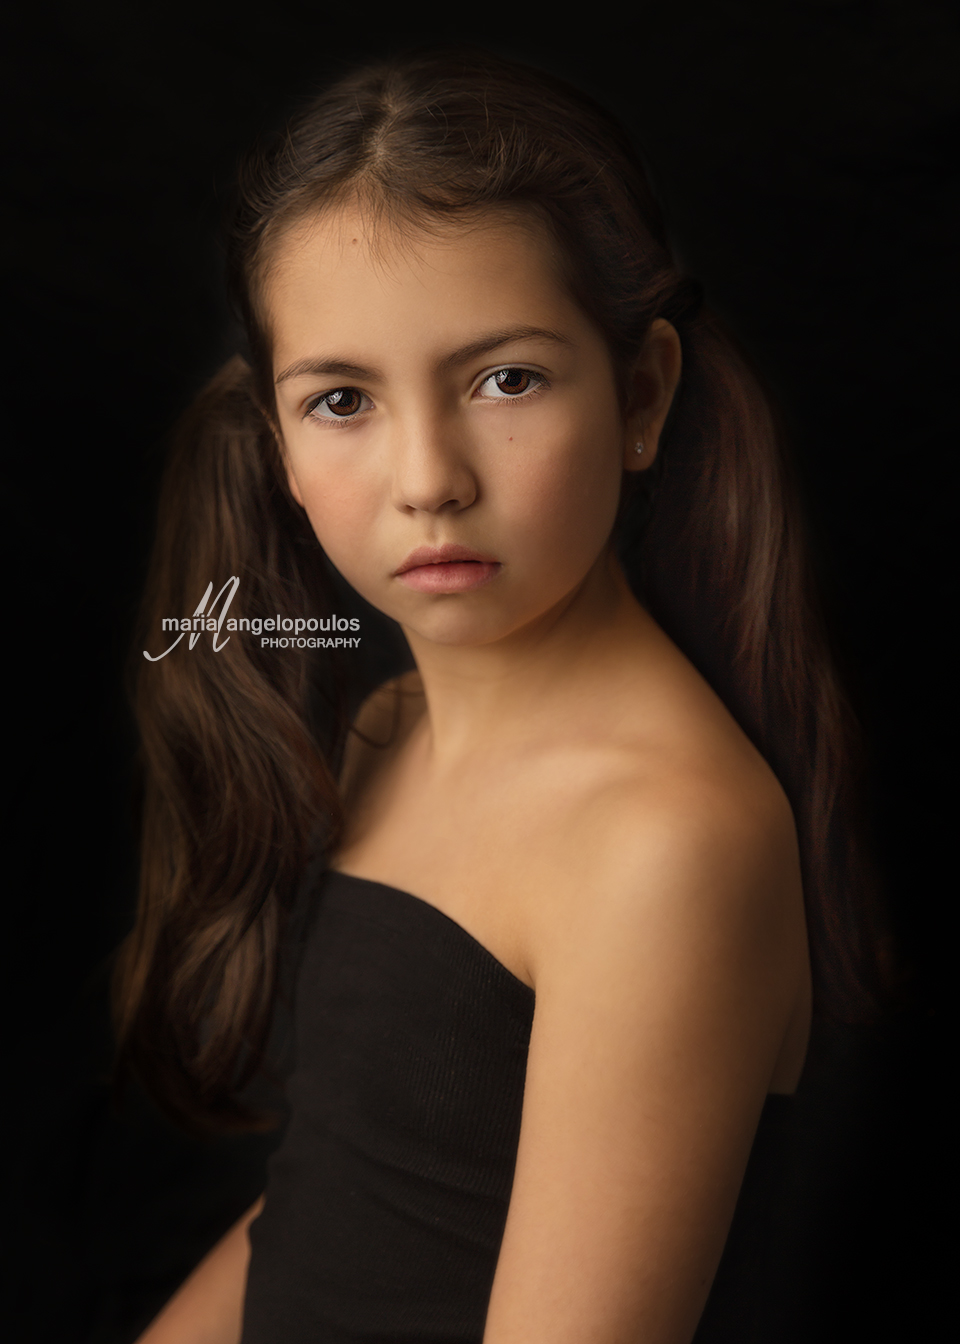 ChildFineArt Children's Fine Art, Art, kids, portrait, photography. by Maria Angelopoulos Photogrpahy